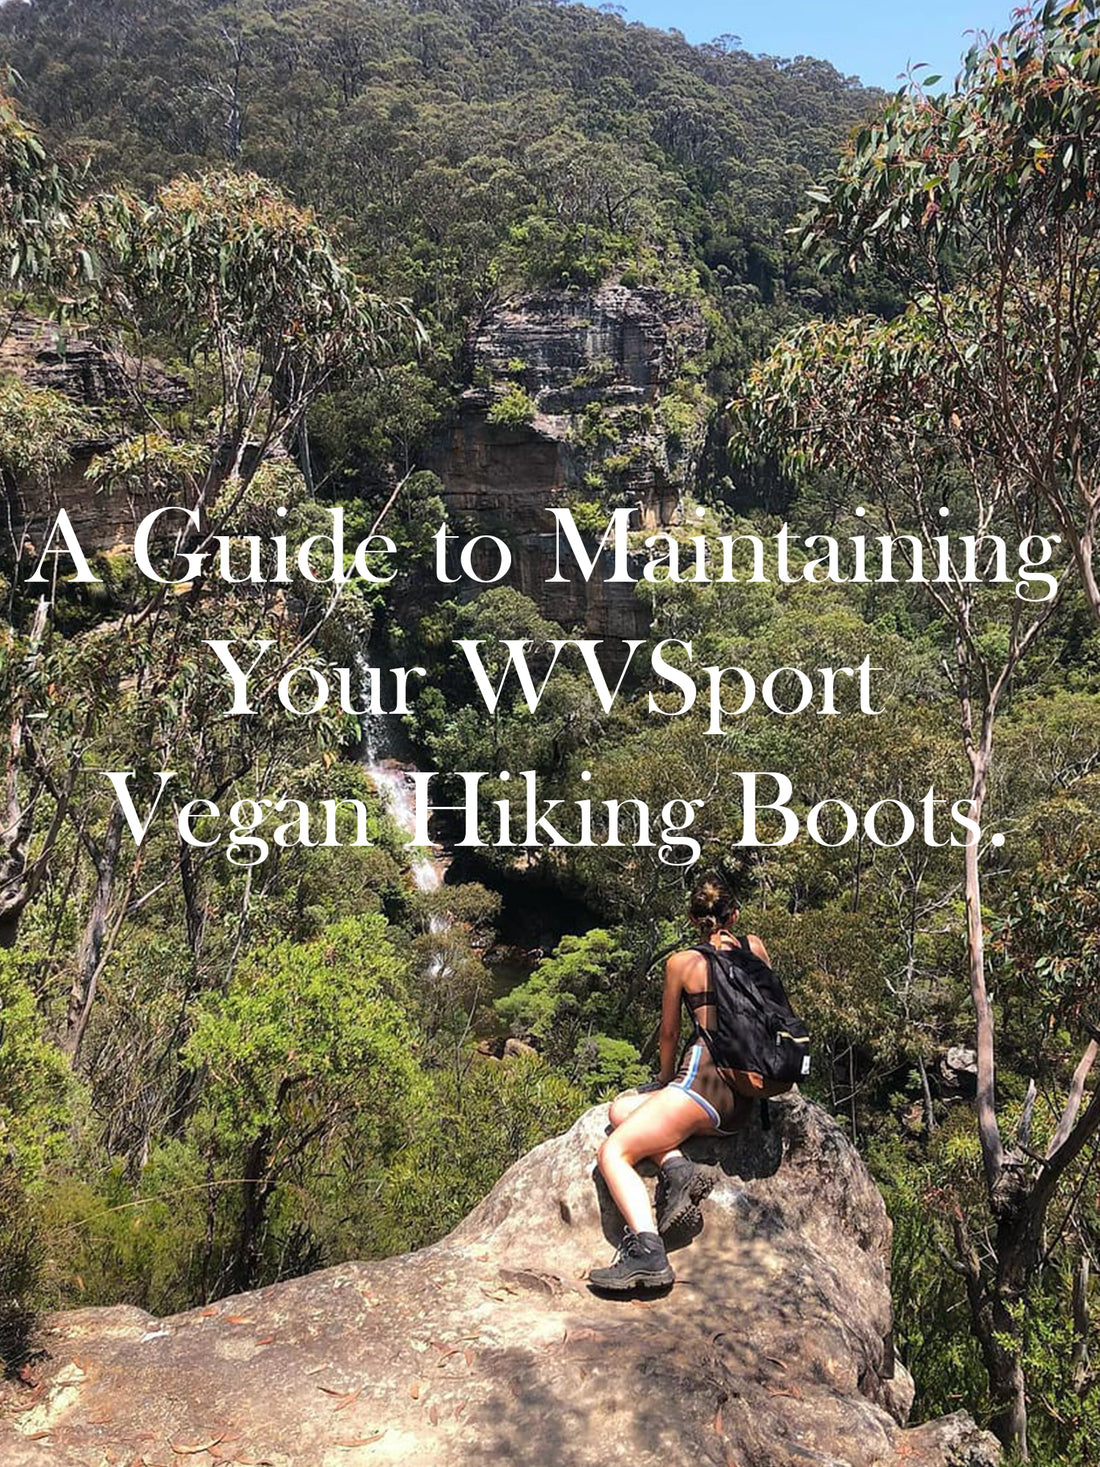 A Guide to Maintaining Your WVSport Vegan Hiking Boots.